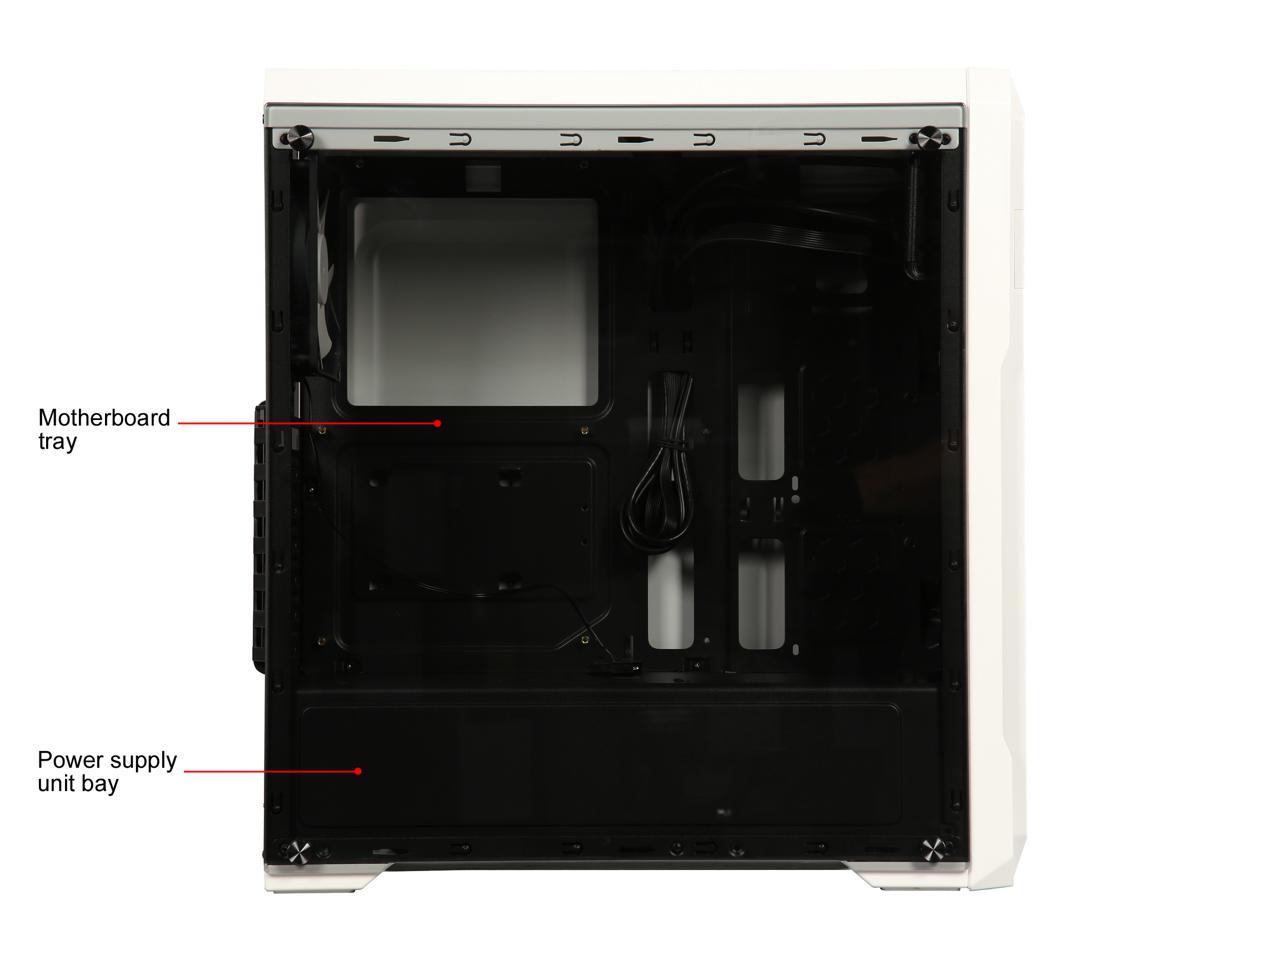 DIYPC DIY-A1-W White Tempered Glass USB 3.0 ATX Mid Tower Computer Case with 1 x 6946815456264 ...